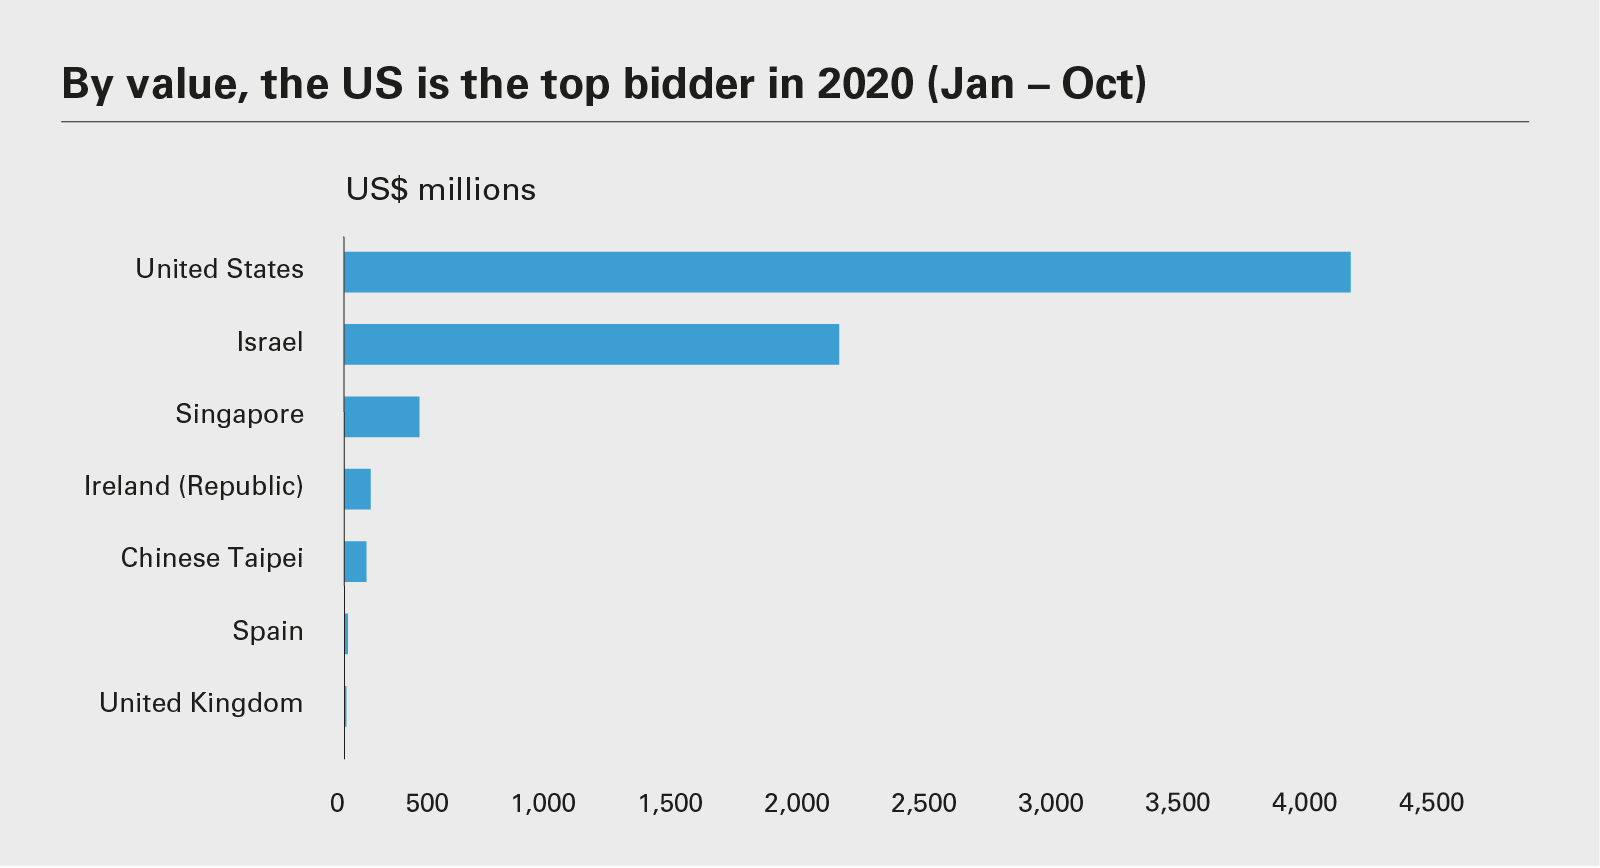 By value, the US is the top bidder in 2020 (Jan – Oct)